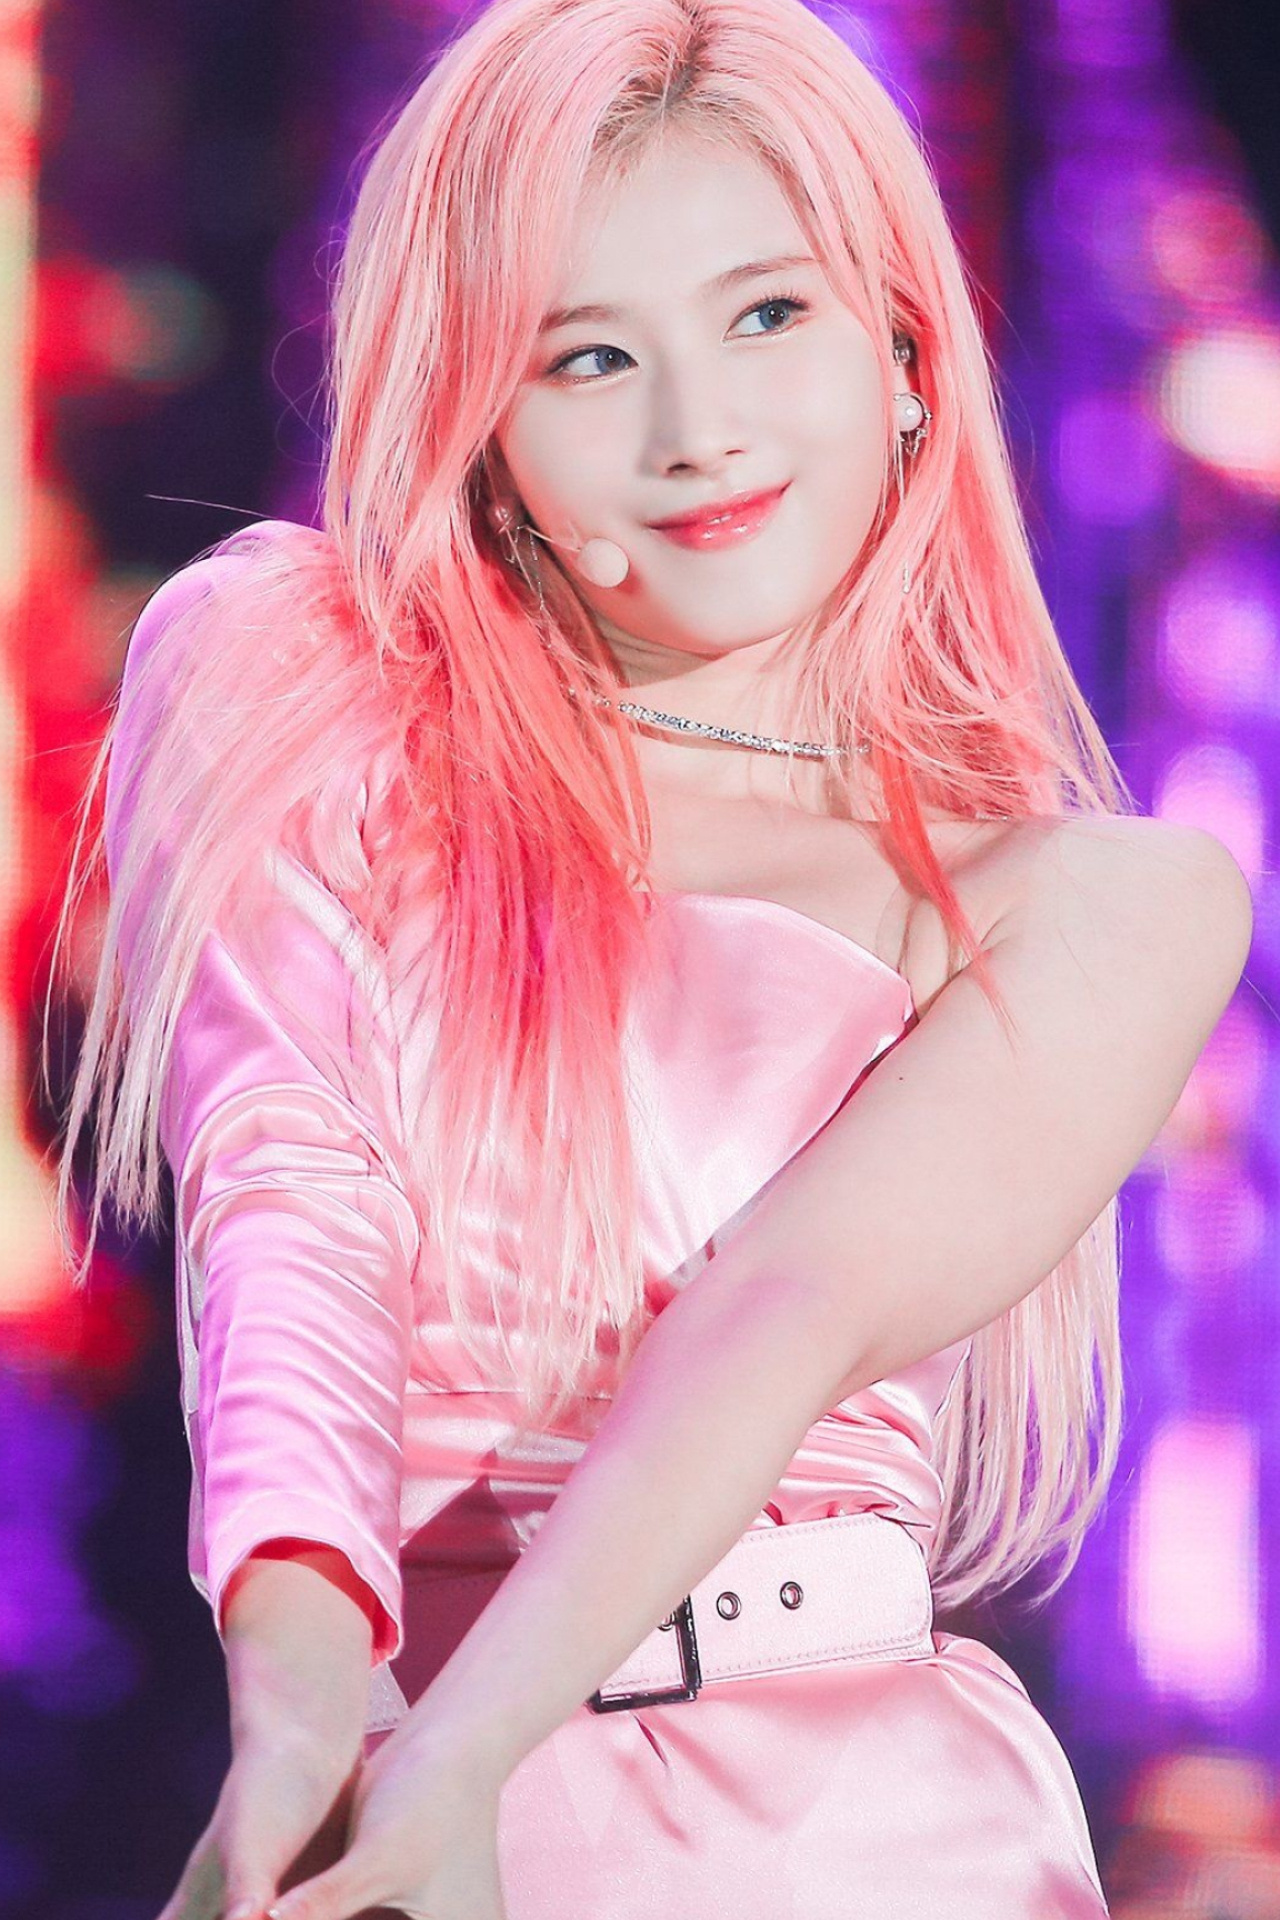 Sana (TWICE), Mythical Japanese god, Allkpop forum discussions, Music star, 1280x1920 HD Handy